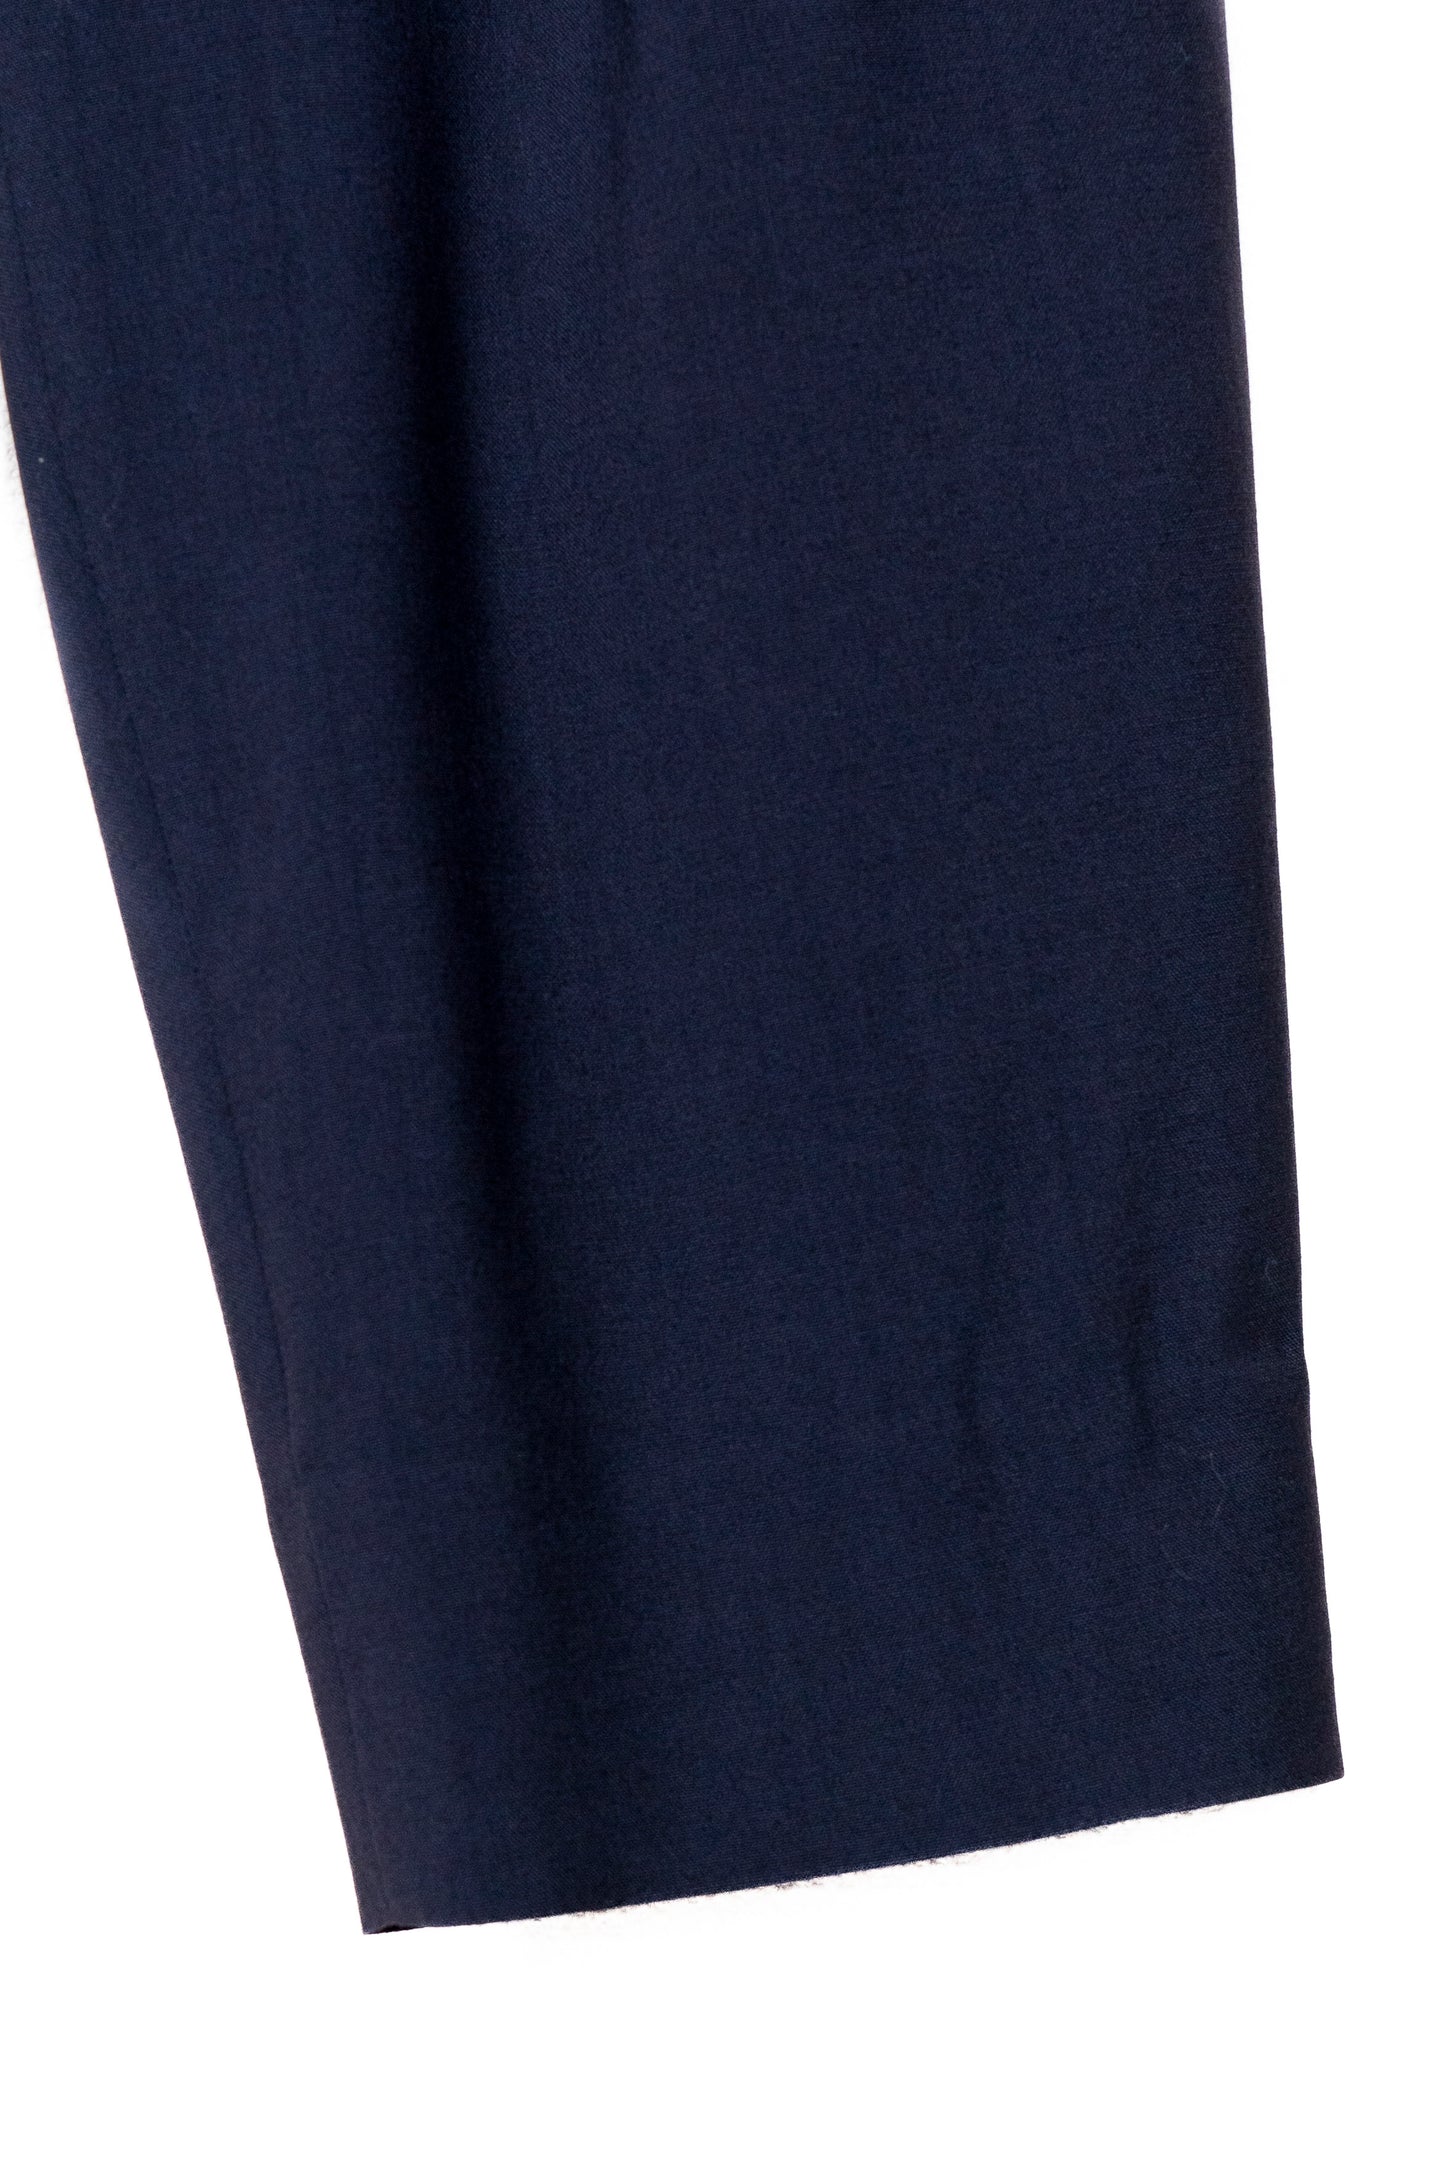 Pleated Trouser with Loops